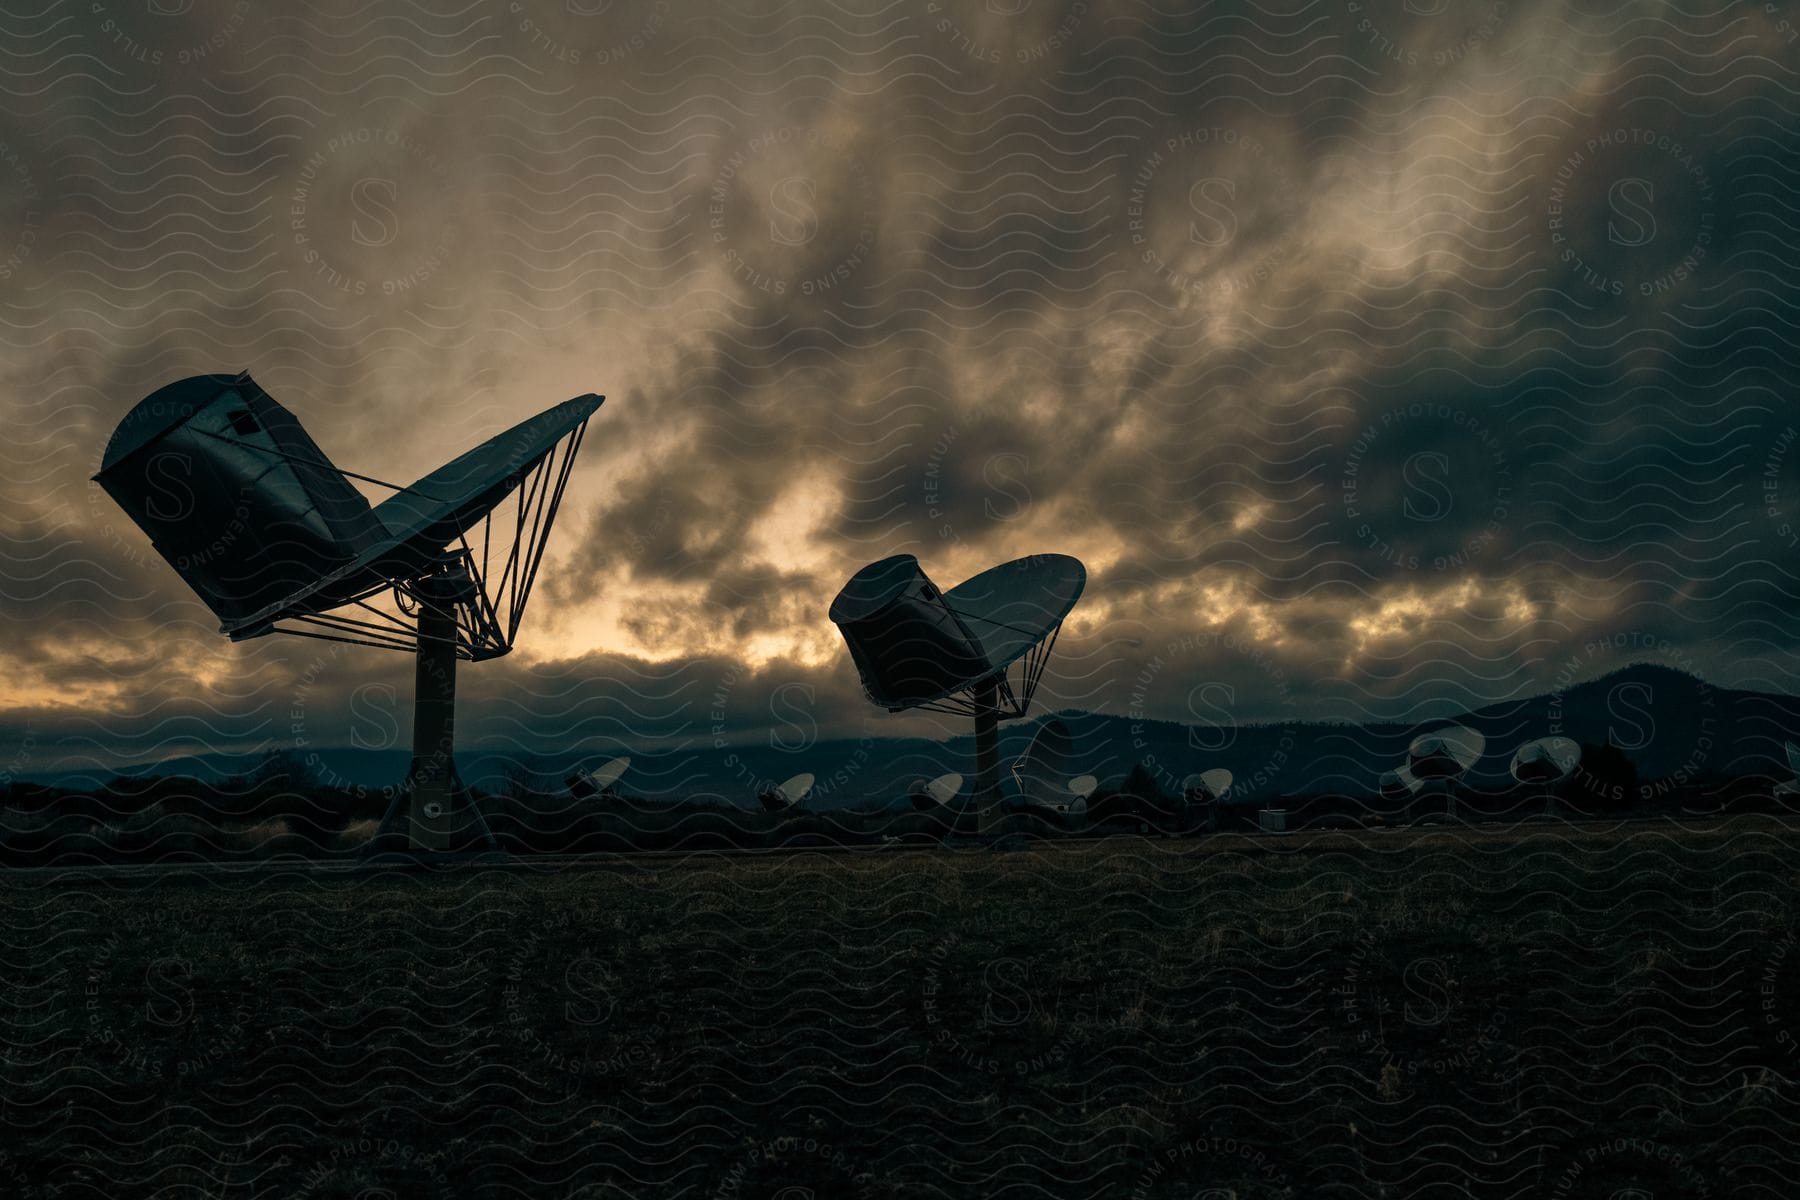 Satellite dishes point skyward in a flat field